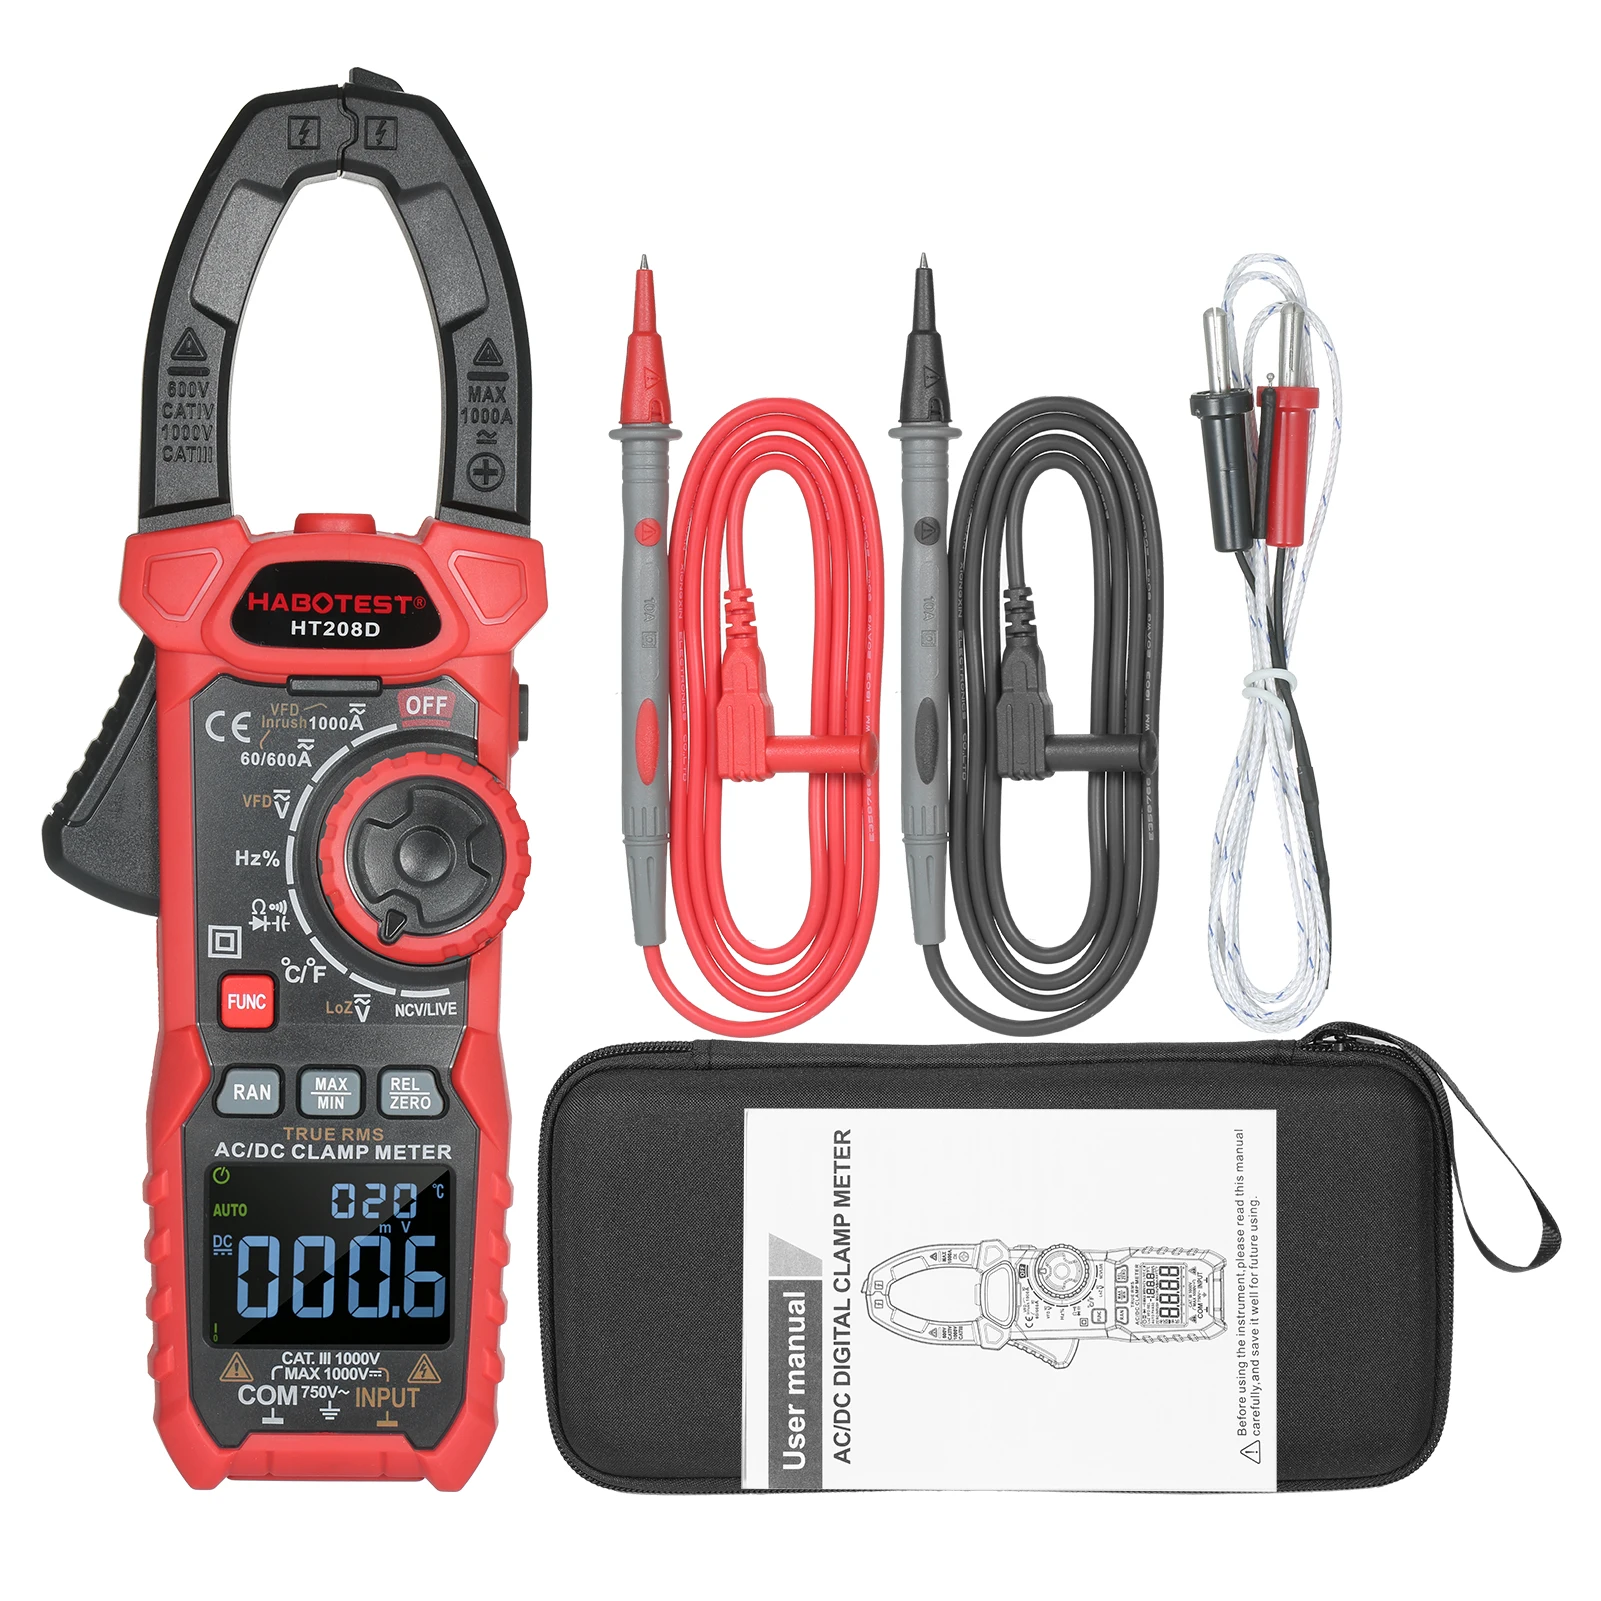 surface roughness gauge HABOTEST HT208D AC/DC Digital Clamp Meter True-RMS Multimeter Anto-Ranging Multi Tester Current Clamp water usage meter